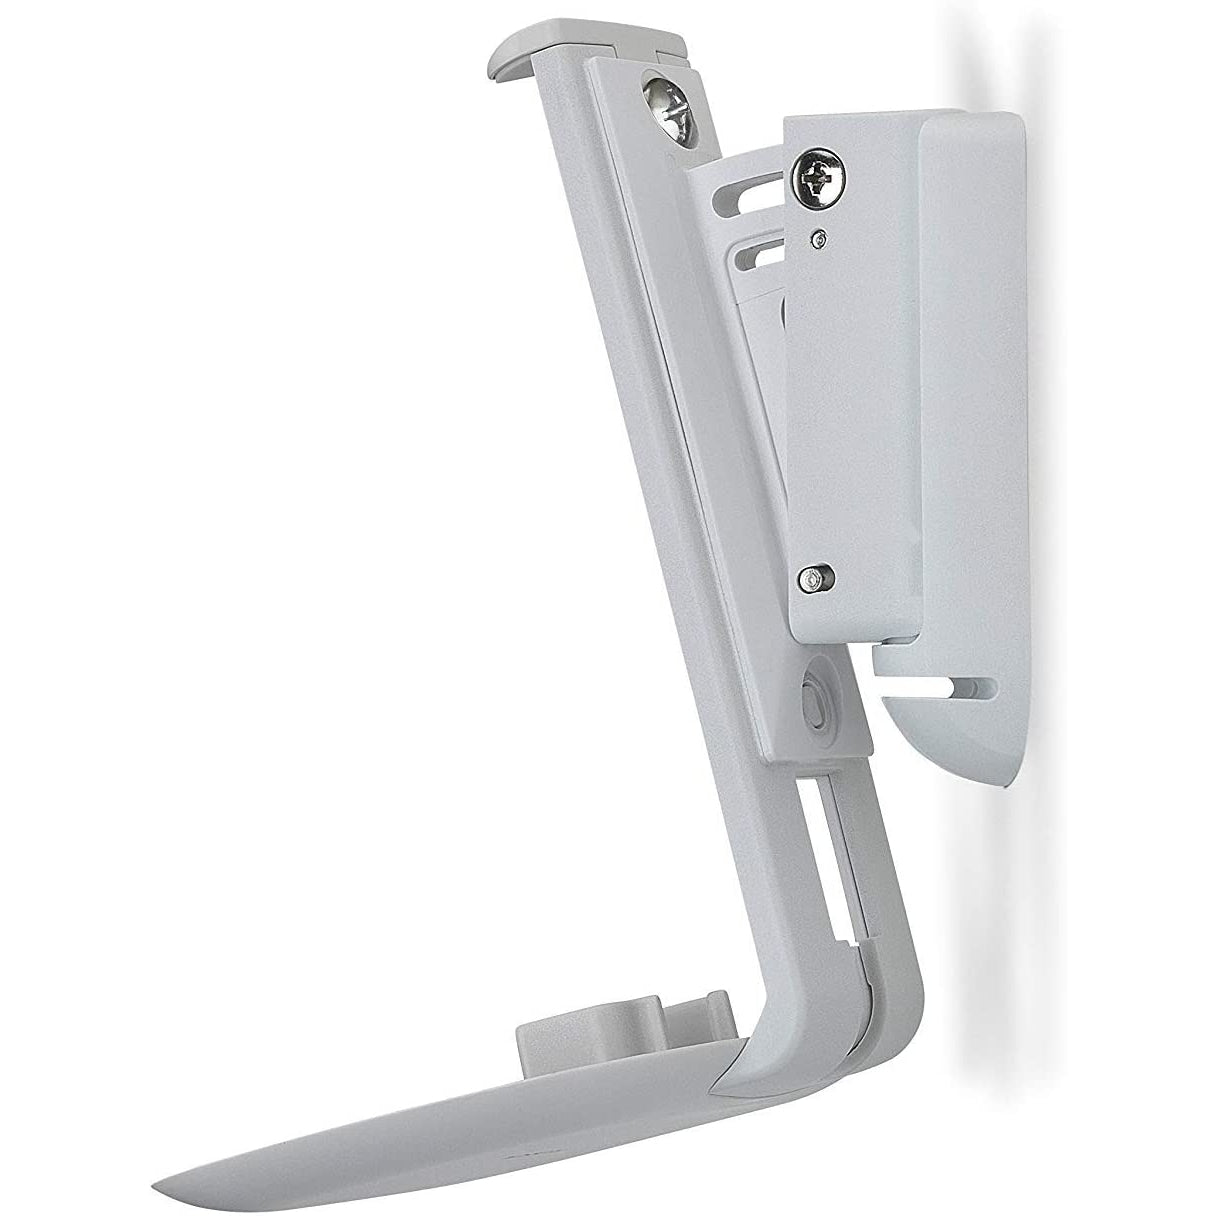 Flexson S1-WM Wall Mount for Sonos One, One SL and Play 1, Single